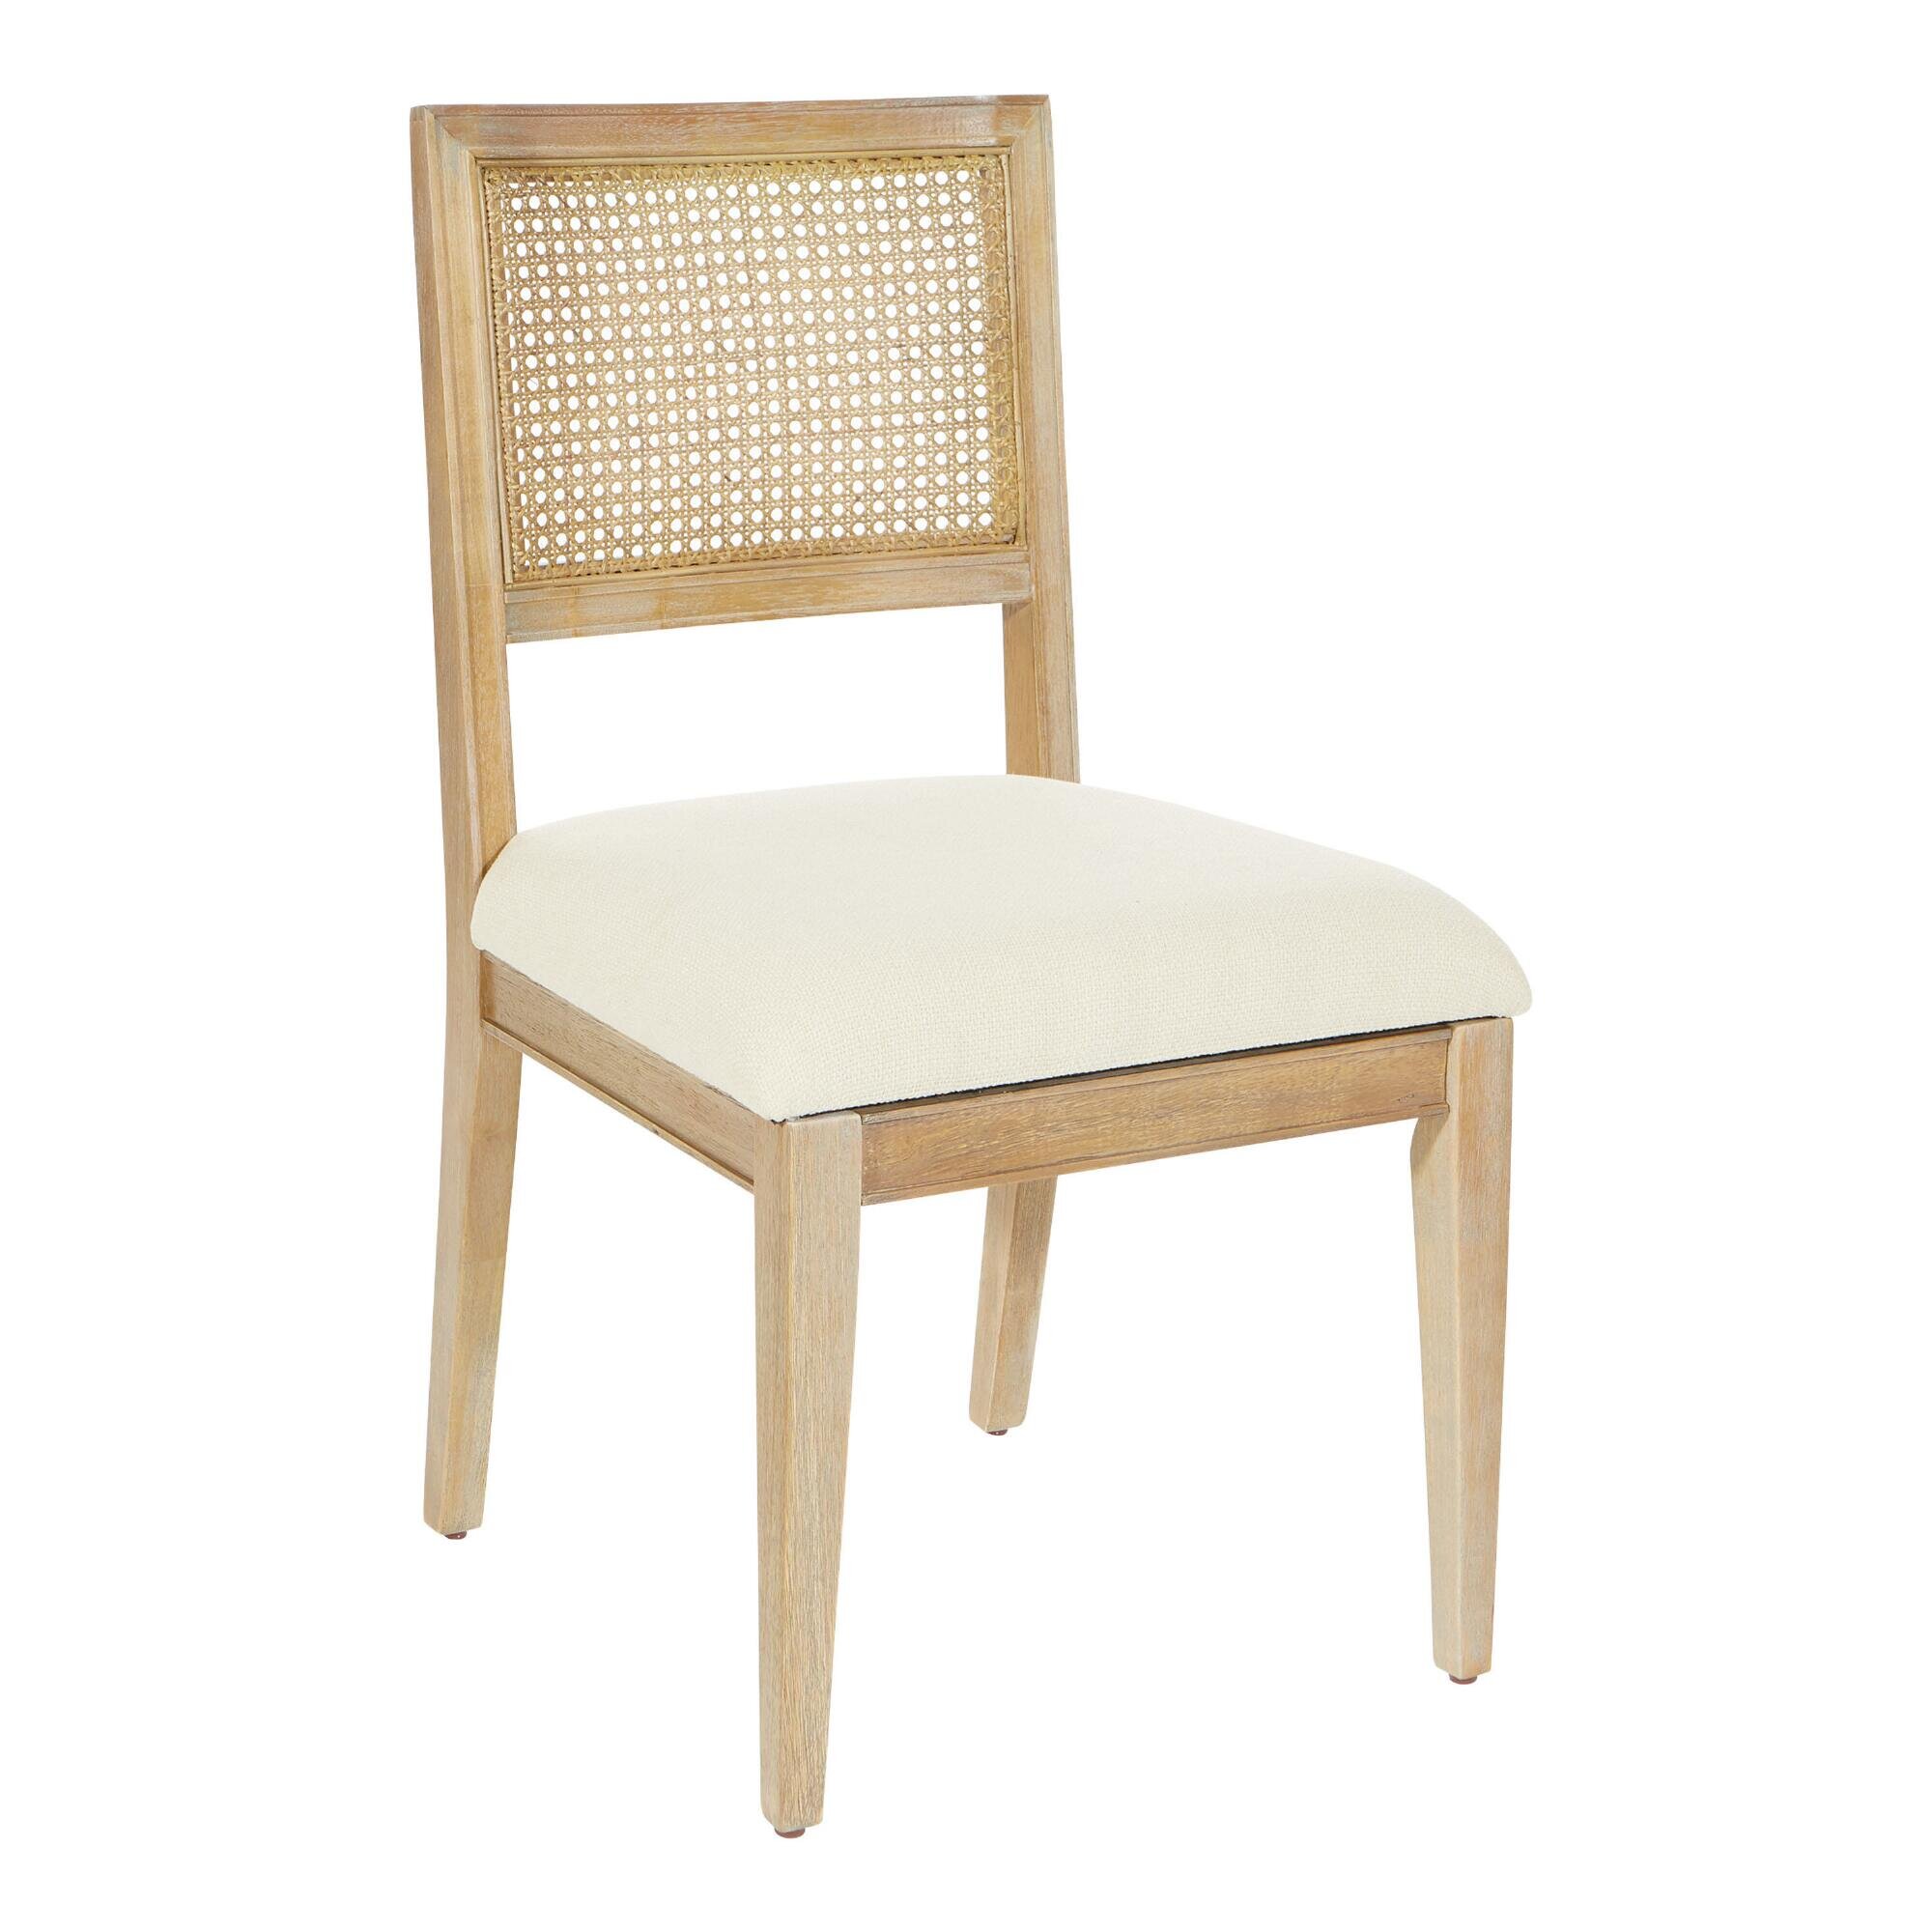 World Market - Wood And Linen Cane Back Jakob Dining Chairs Set Of 2 - $449.99